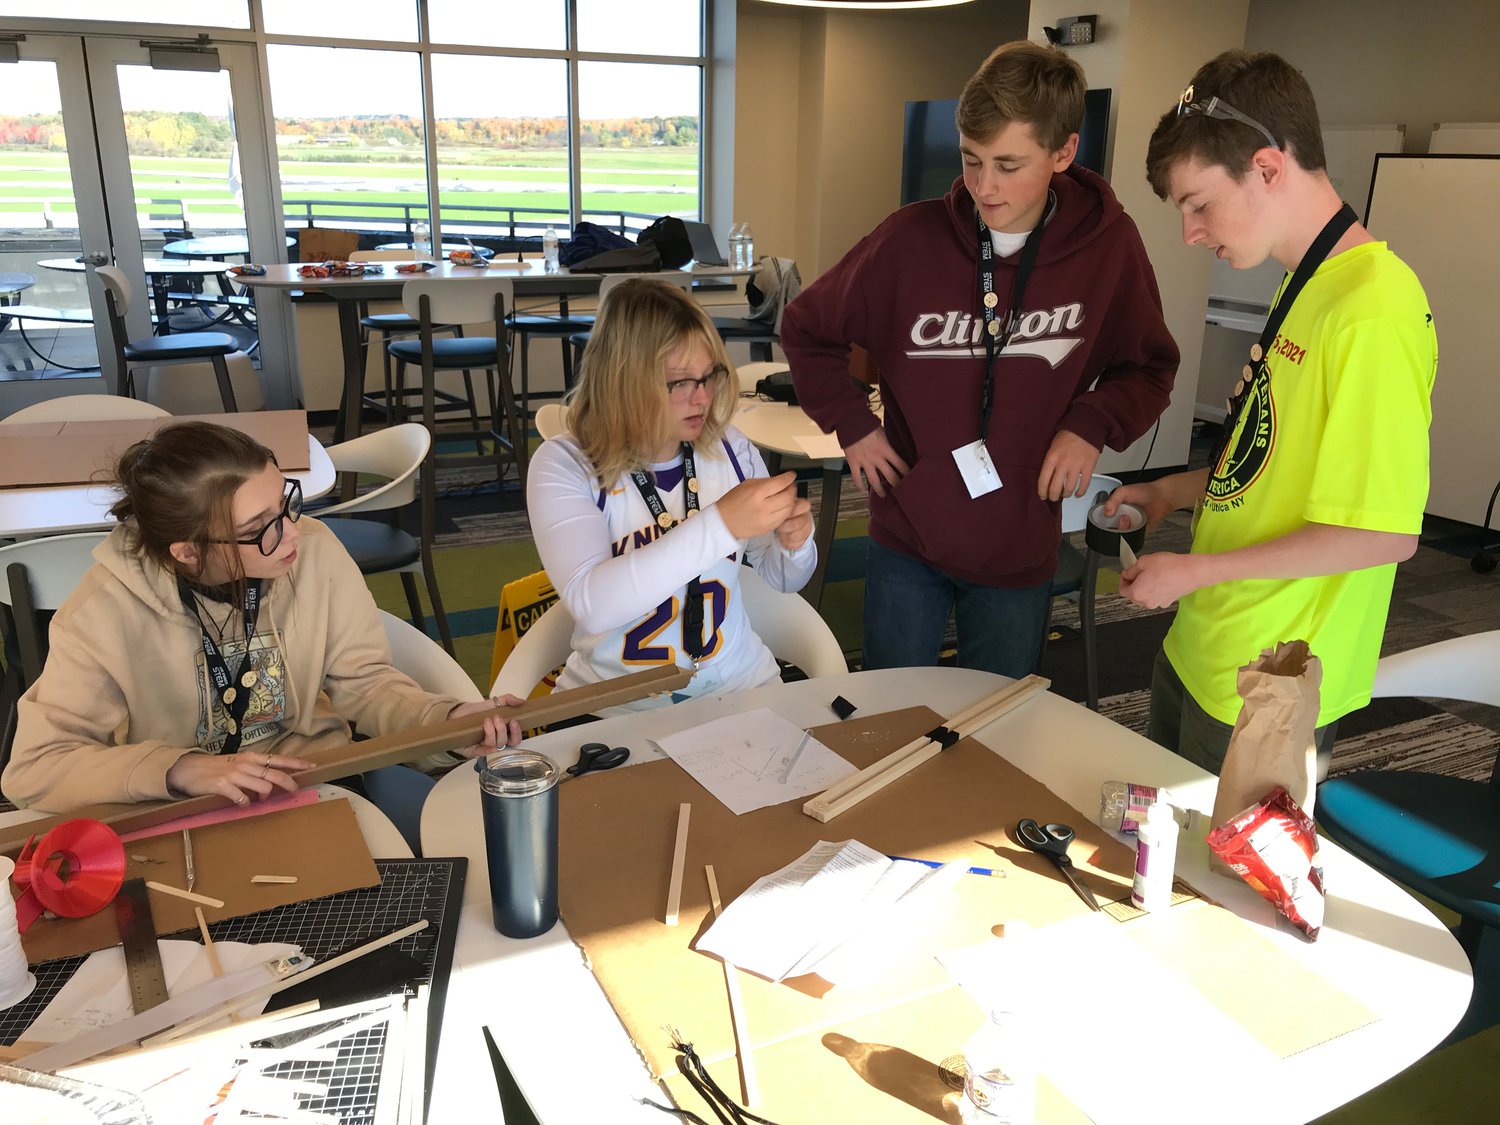 Engineering Wars participants, from left, Savanah Smutz, Addyson Carrier, Wyatt Forbes and Caden Salzburg from Oneida-Herkimer-Madison BOCES build their competition entry Friday at the Innovare Advancement Center in Rome.